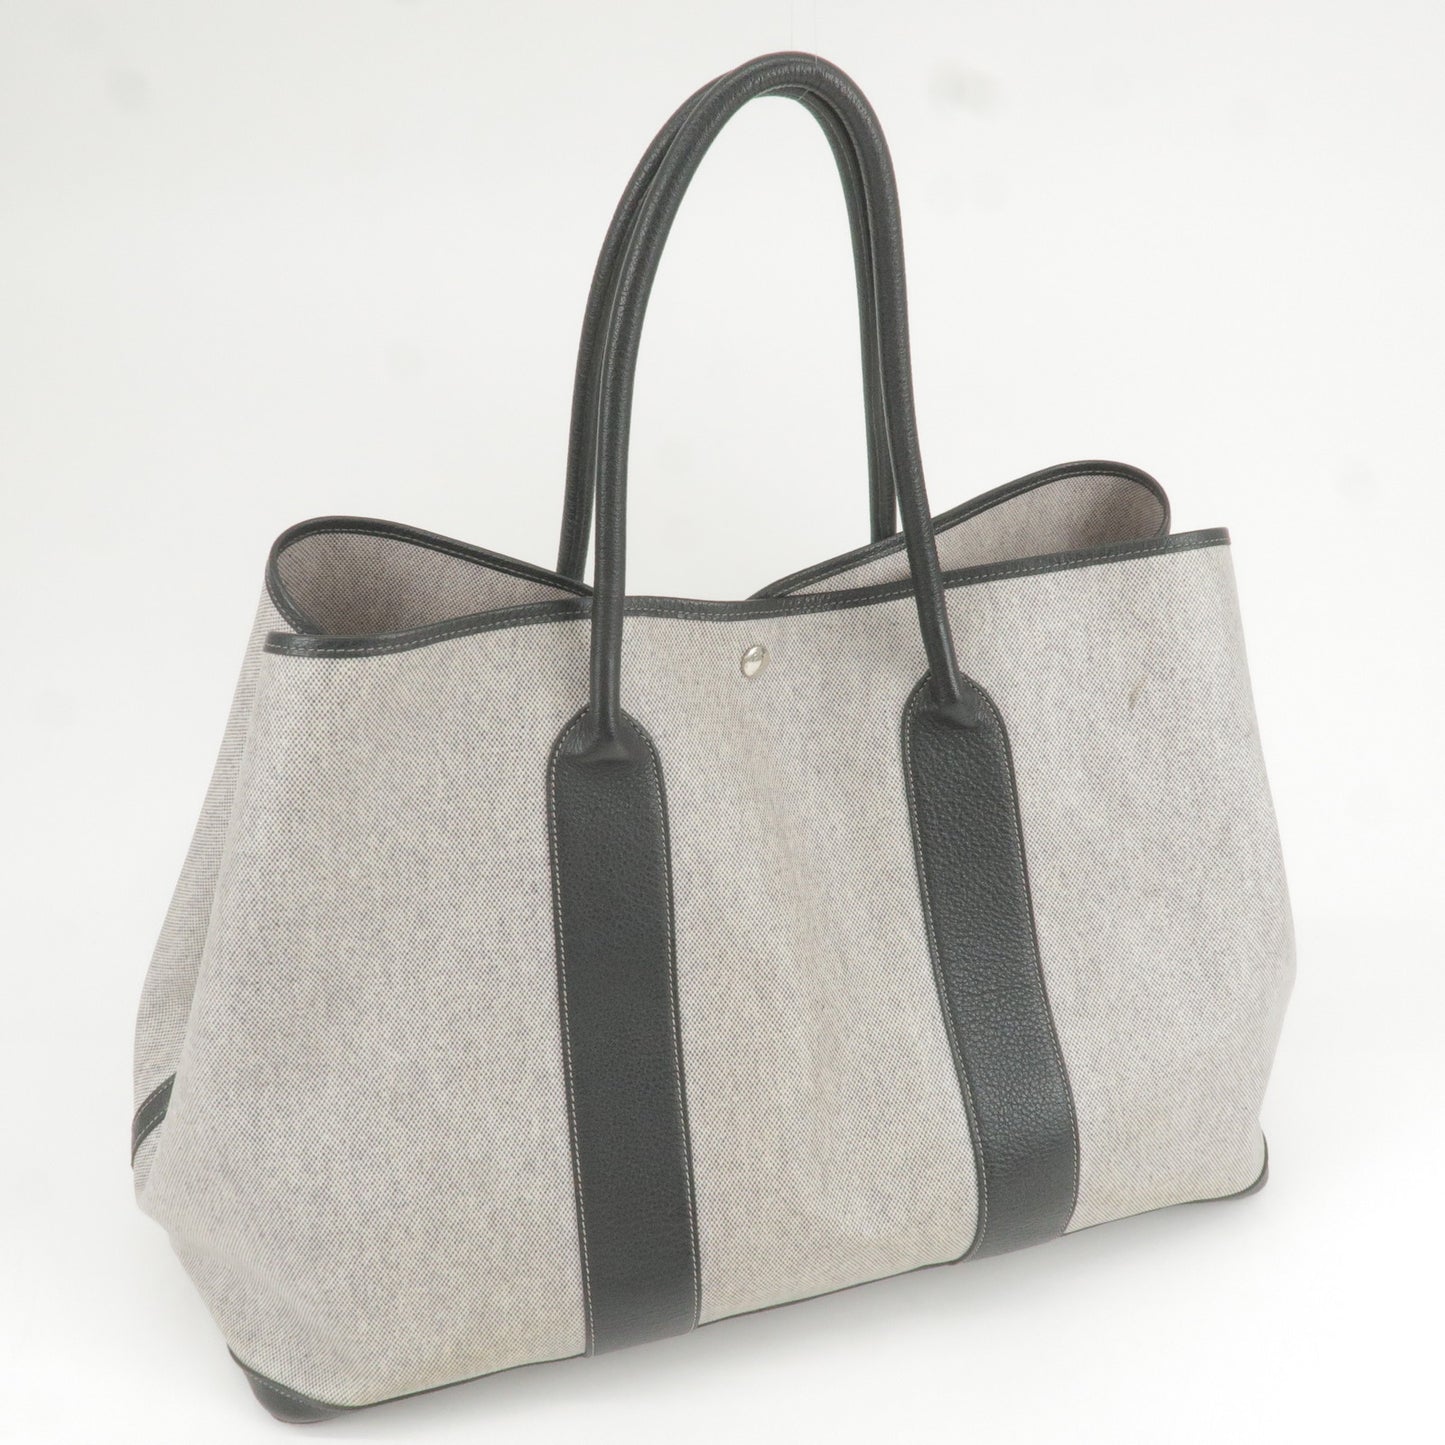 HERMES Toile Ash Leather Garden Party GM Tote Bag Gray Black